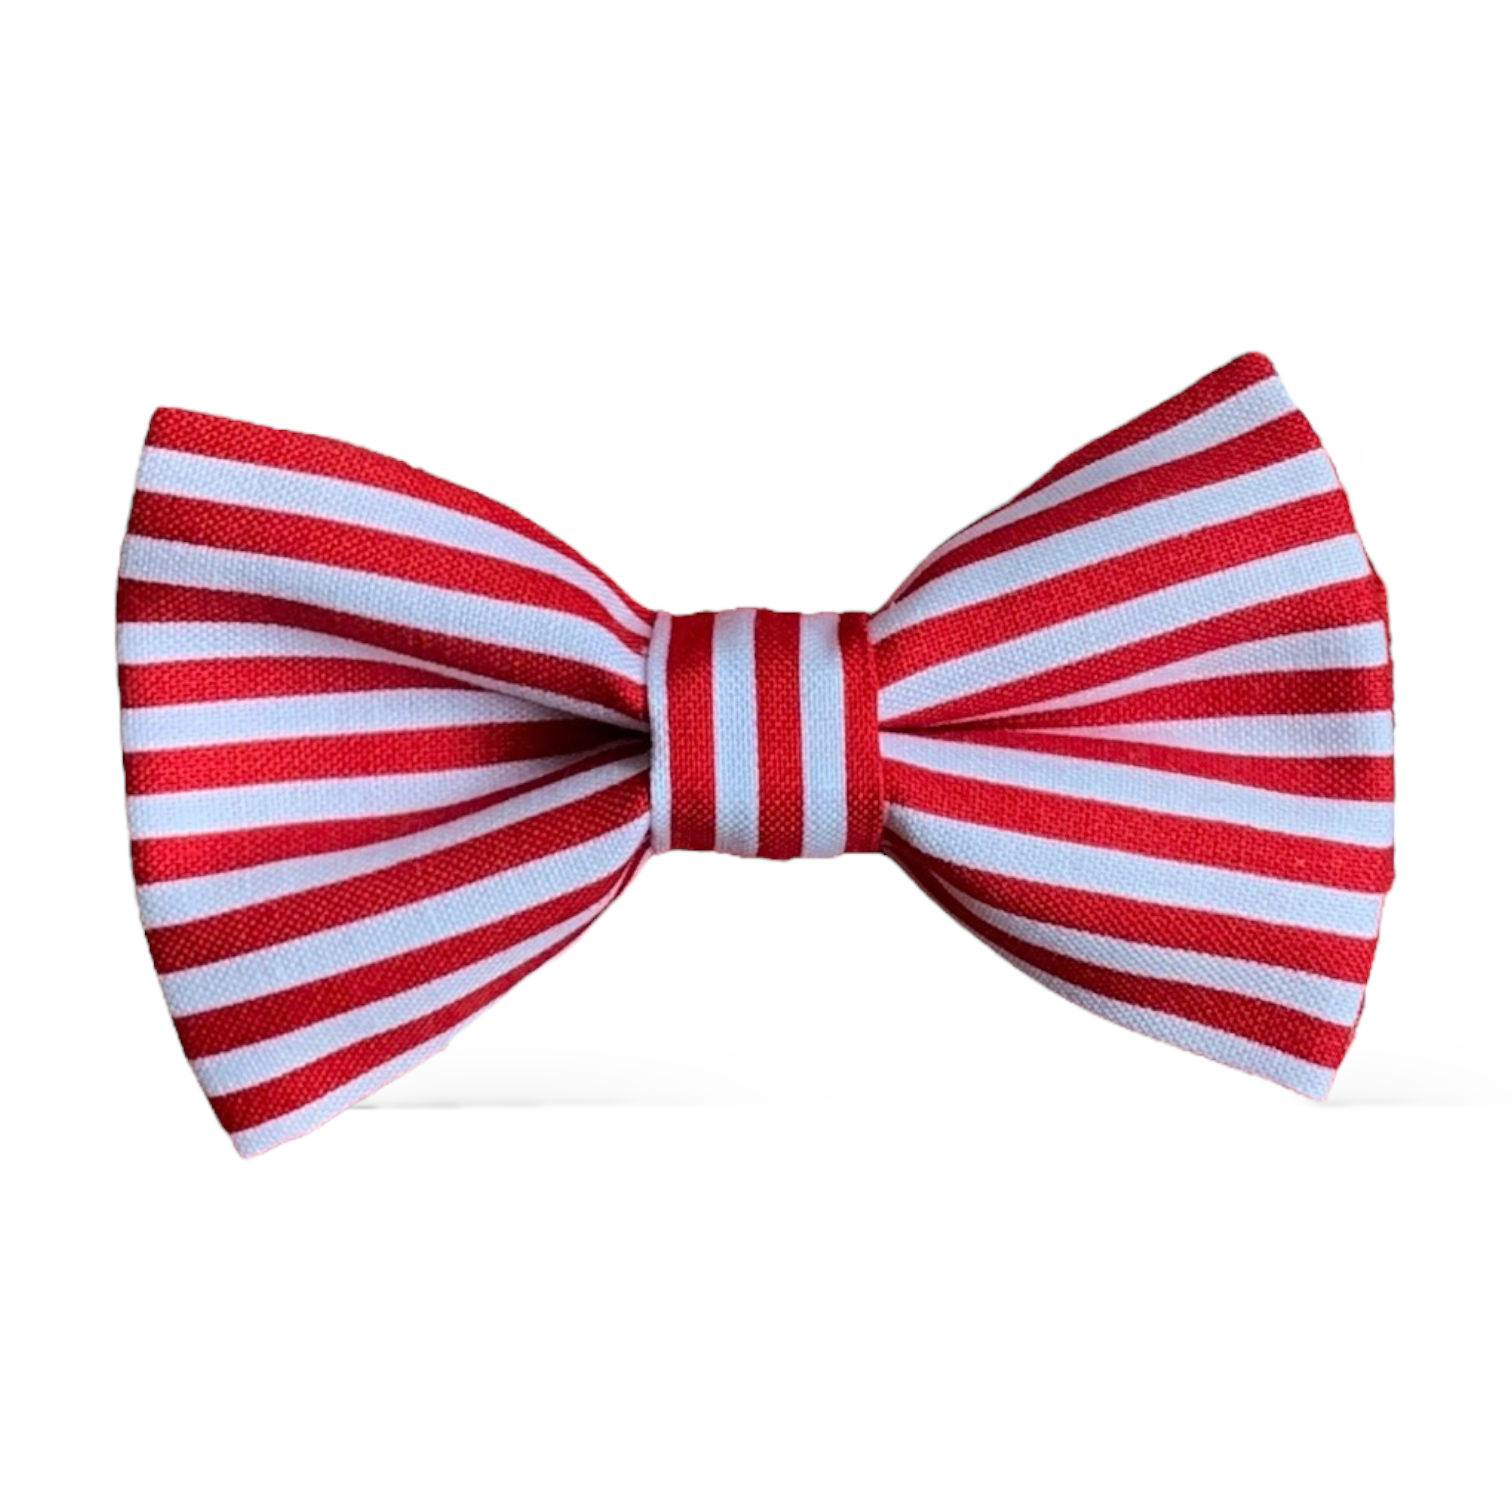 Red and White Striped Cotton Bow Tie